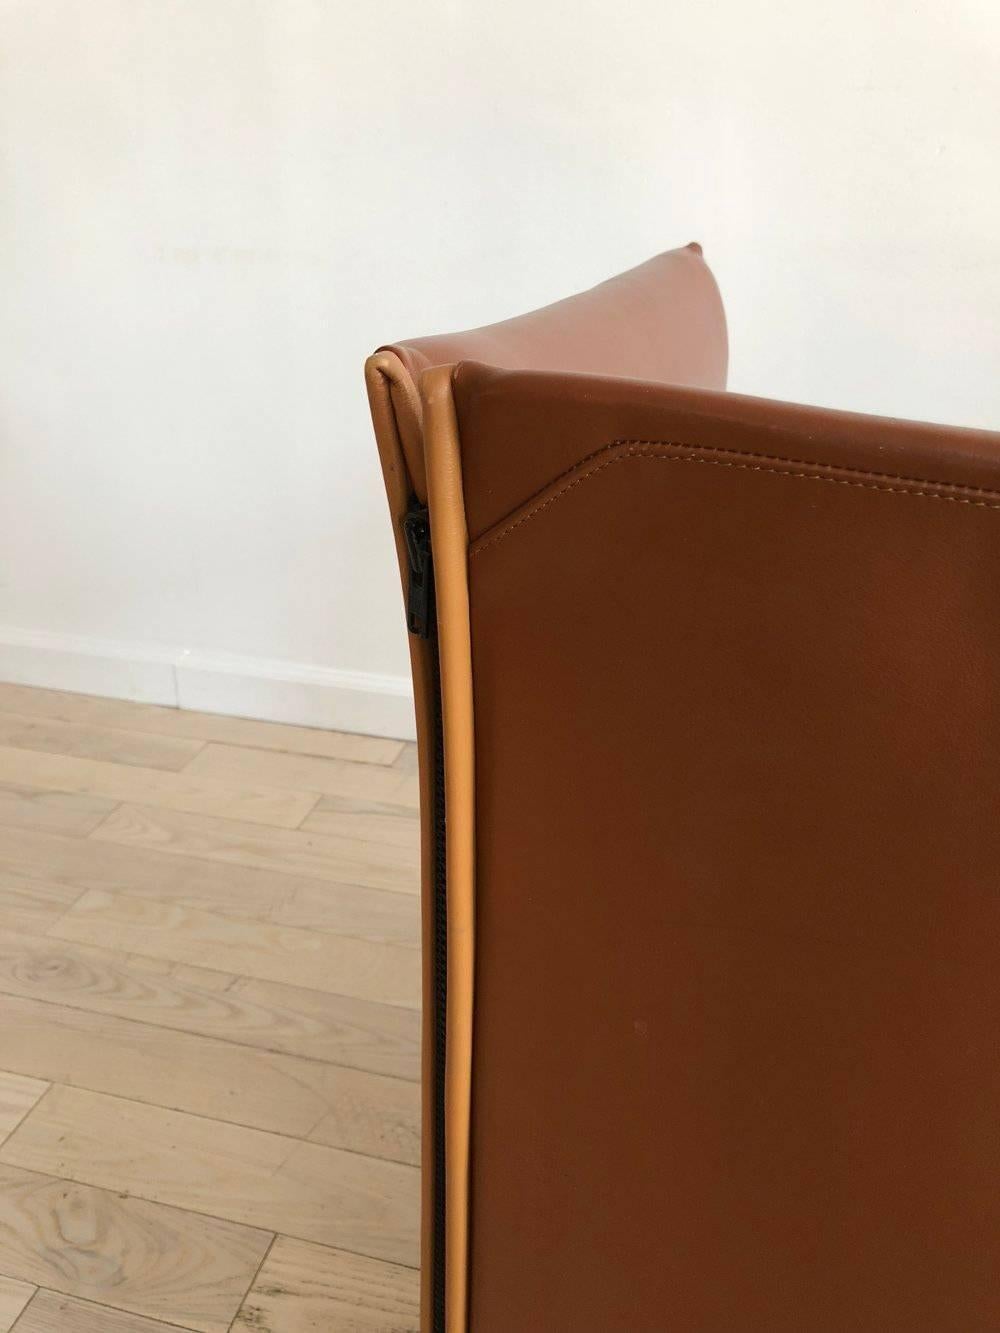 1976 401 Break Chair by Mario Bellini for Cassina, Brown Leather 4